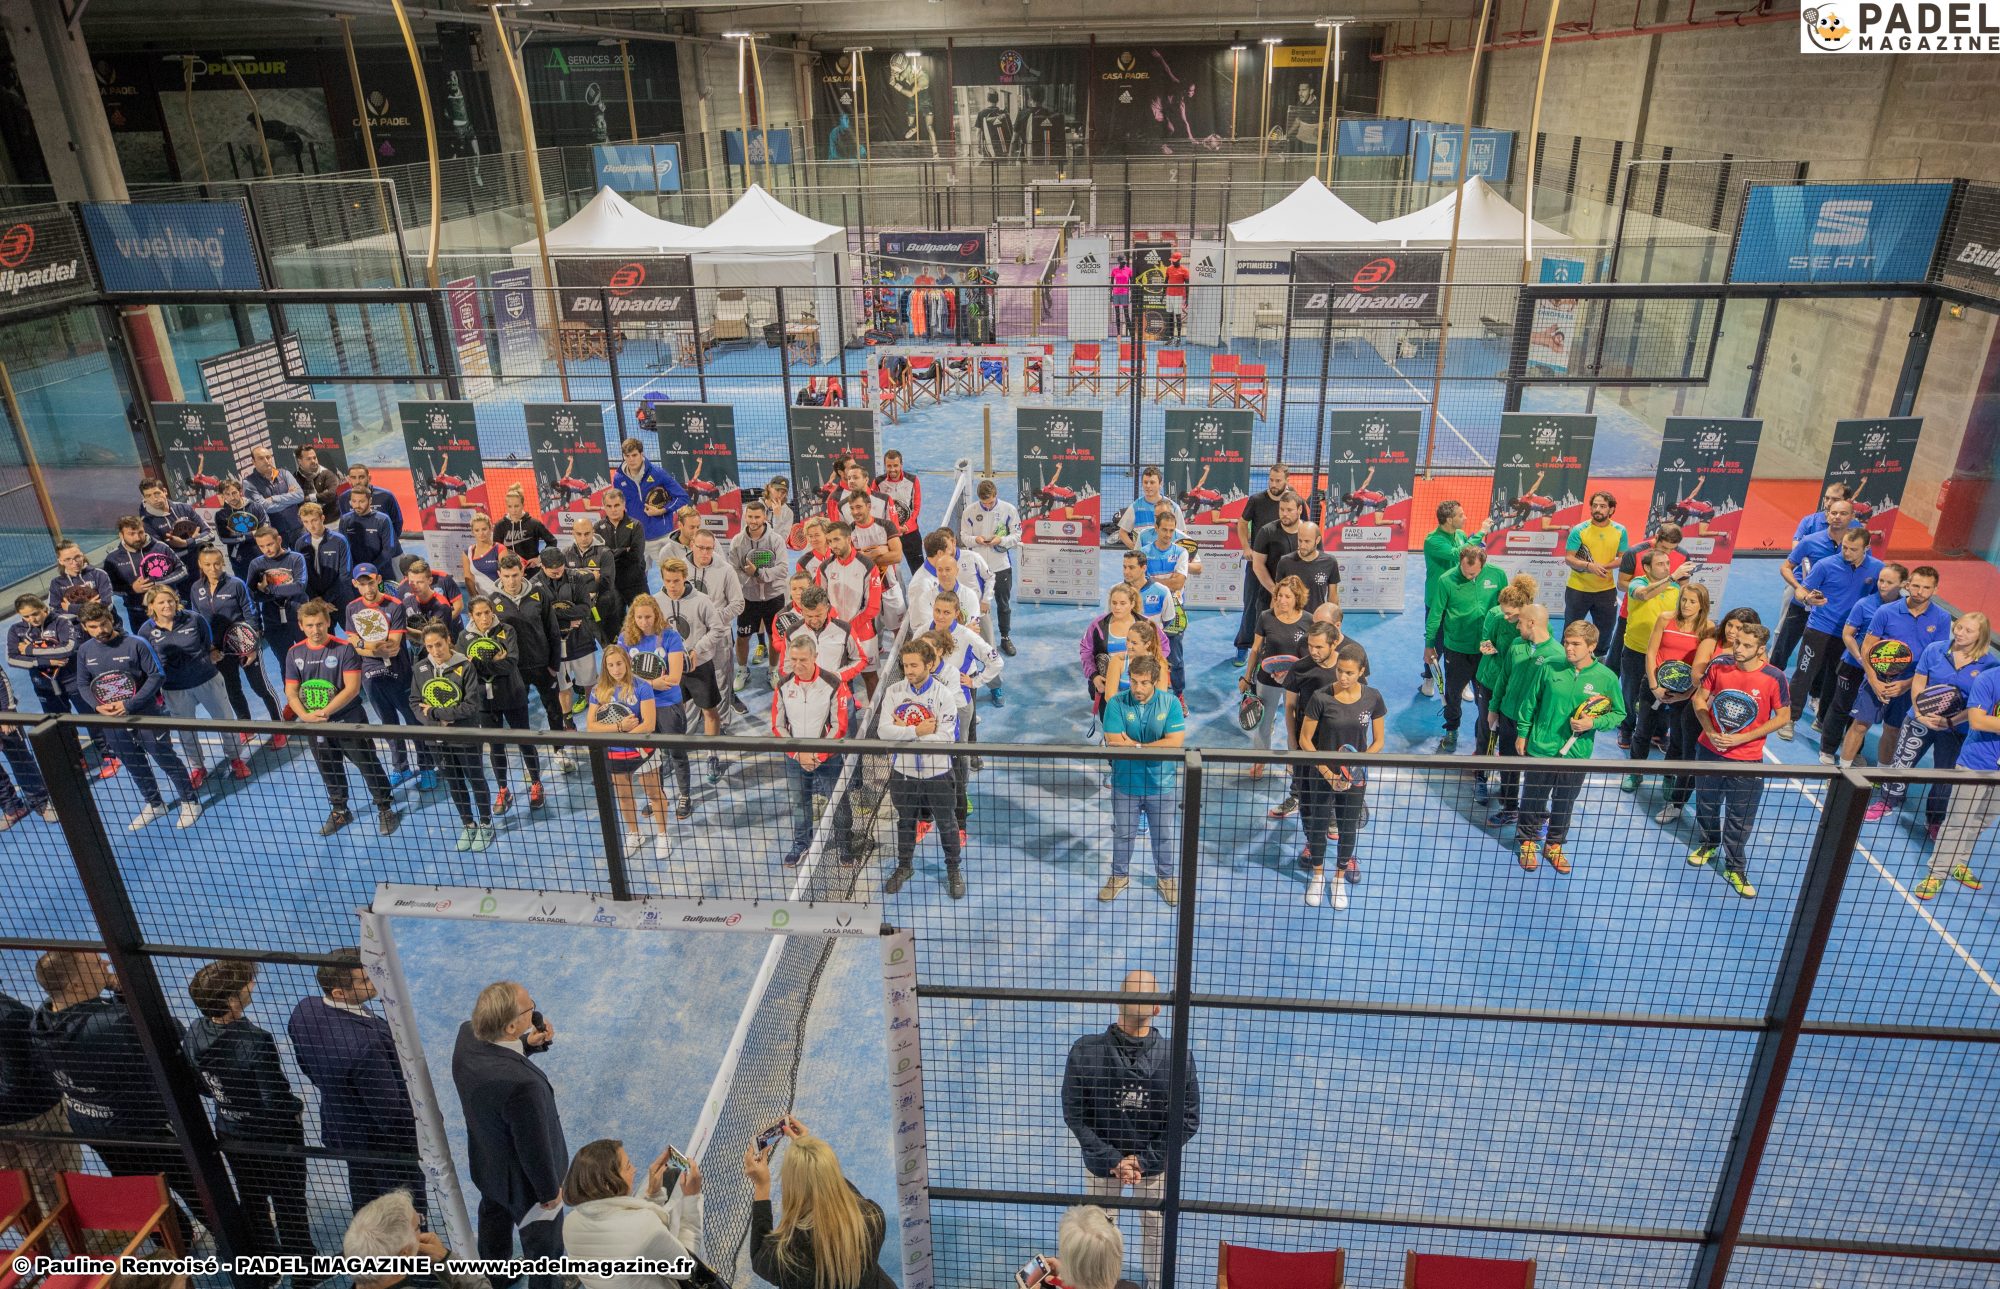 Find all the results of the Euro Padel Cup 2018